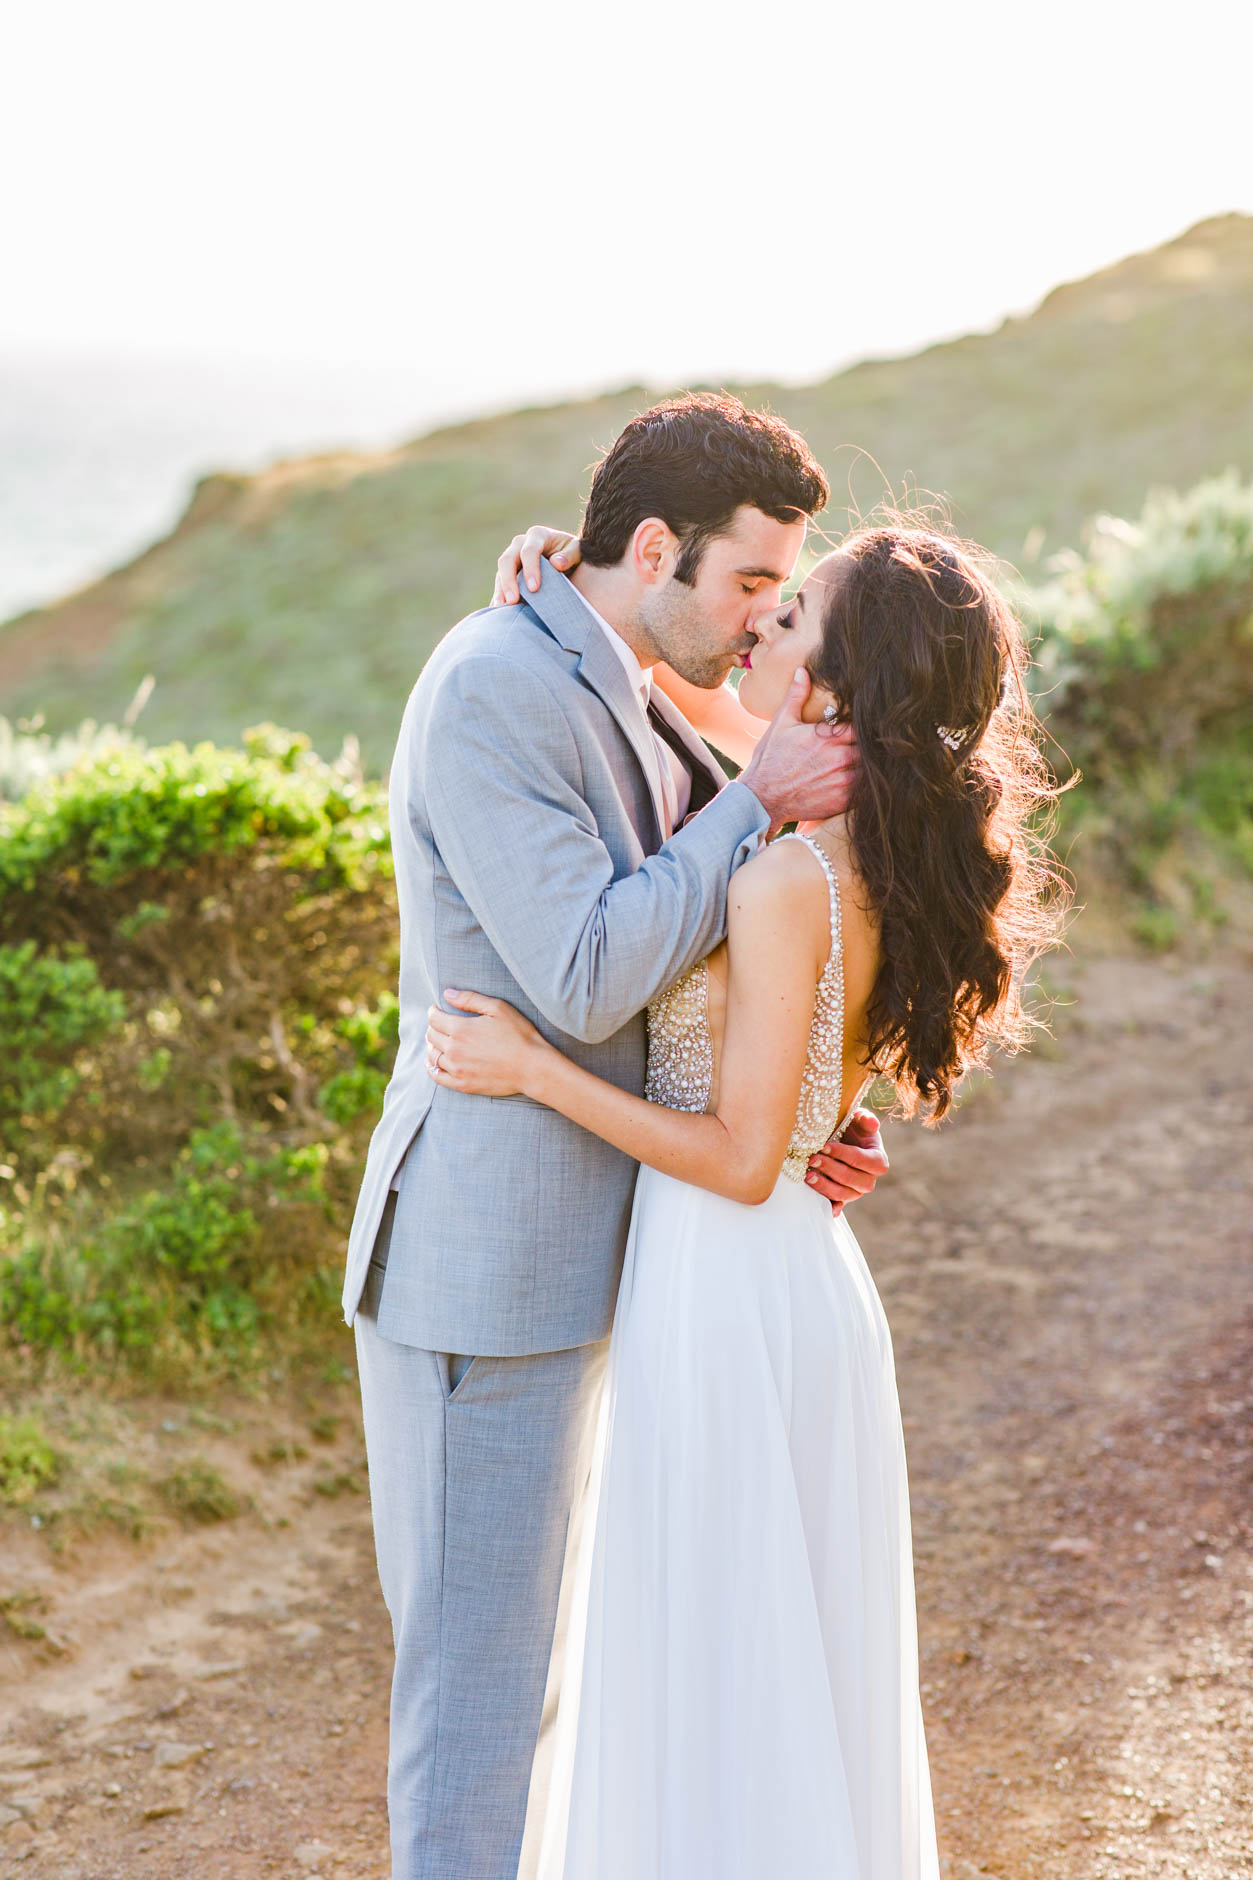 Bride wearing white sequined dress and groom wearing grey suit kissing in Marin Headlands